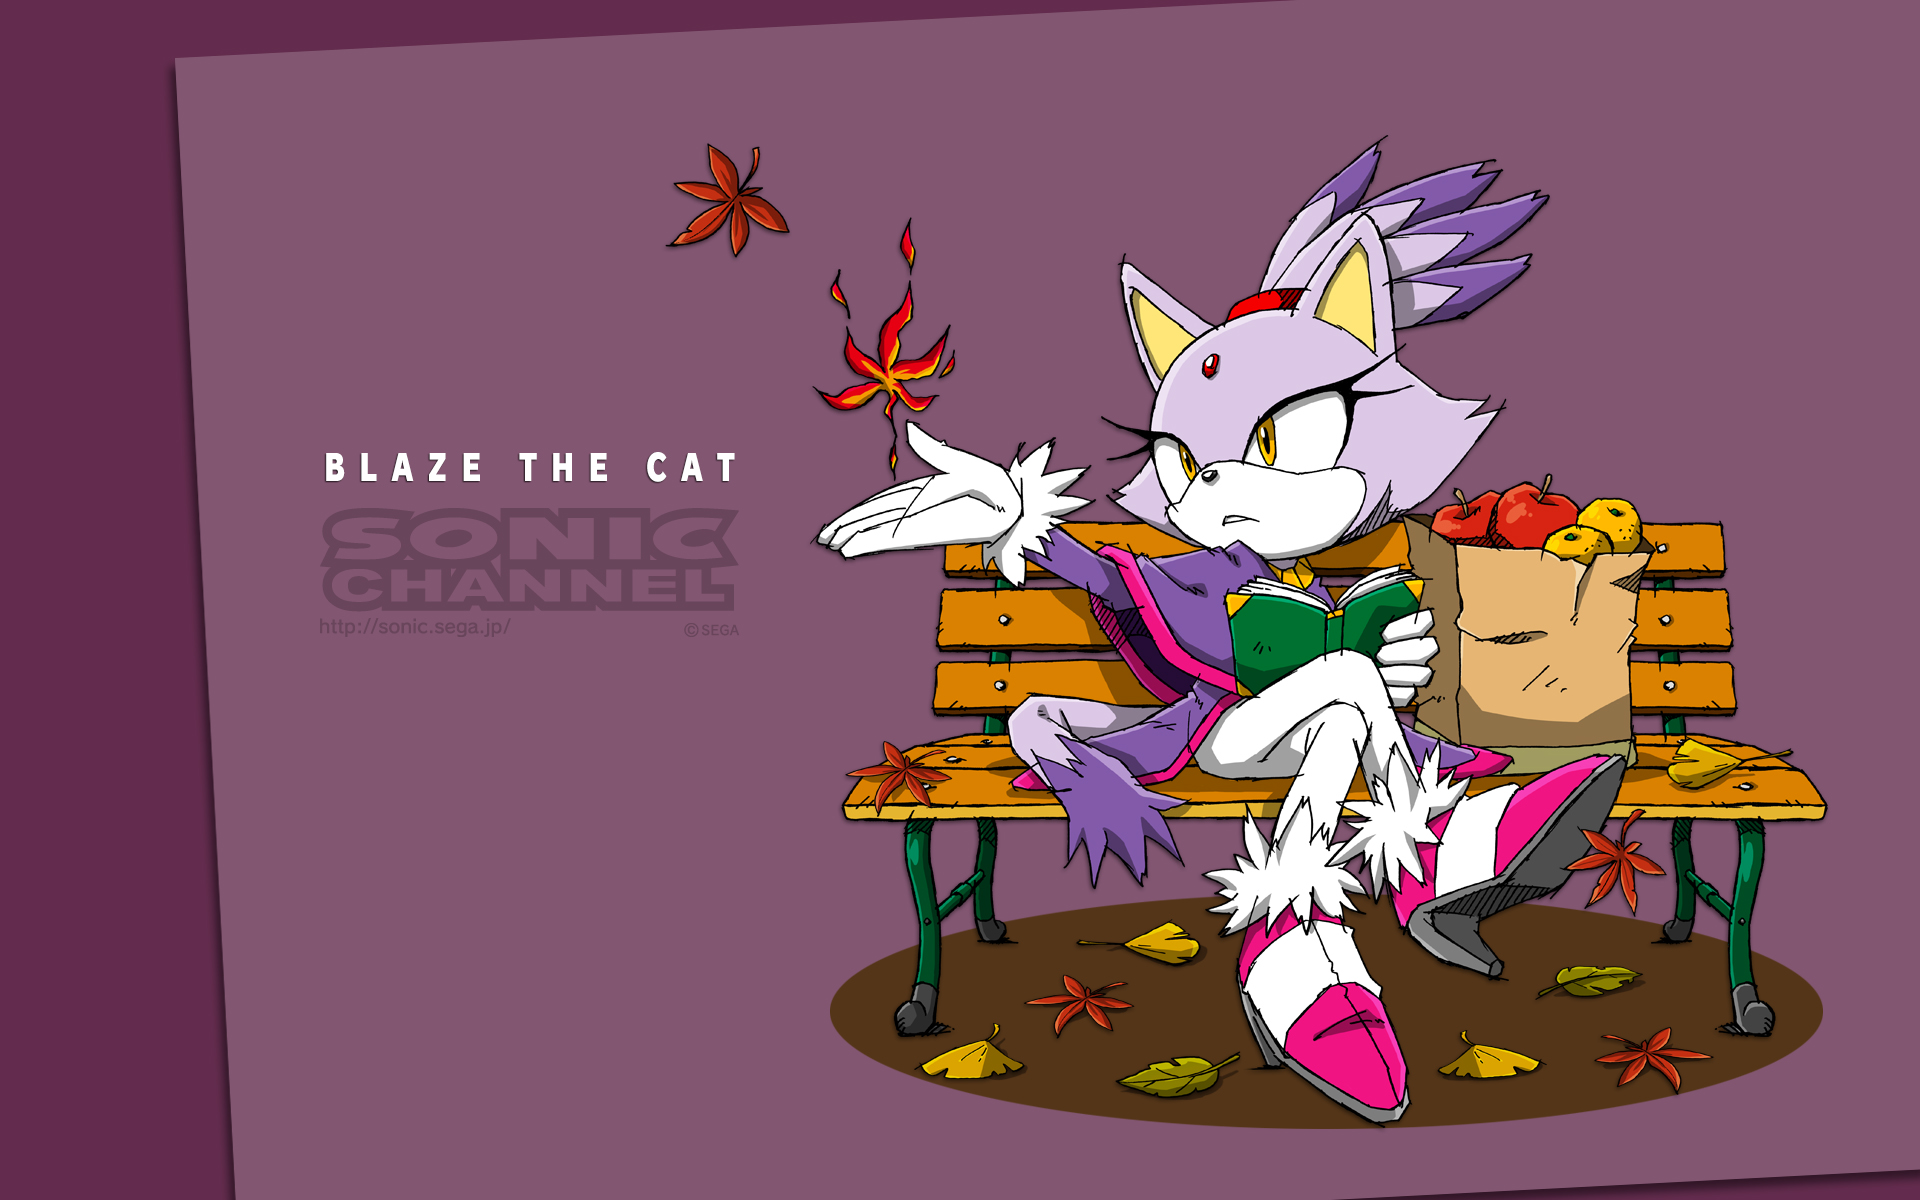 blaze the cat, video game, sonic the hedgehog, sonic channel, sonic